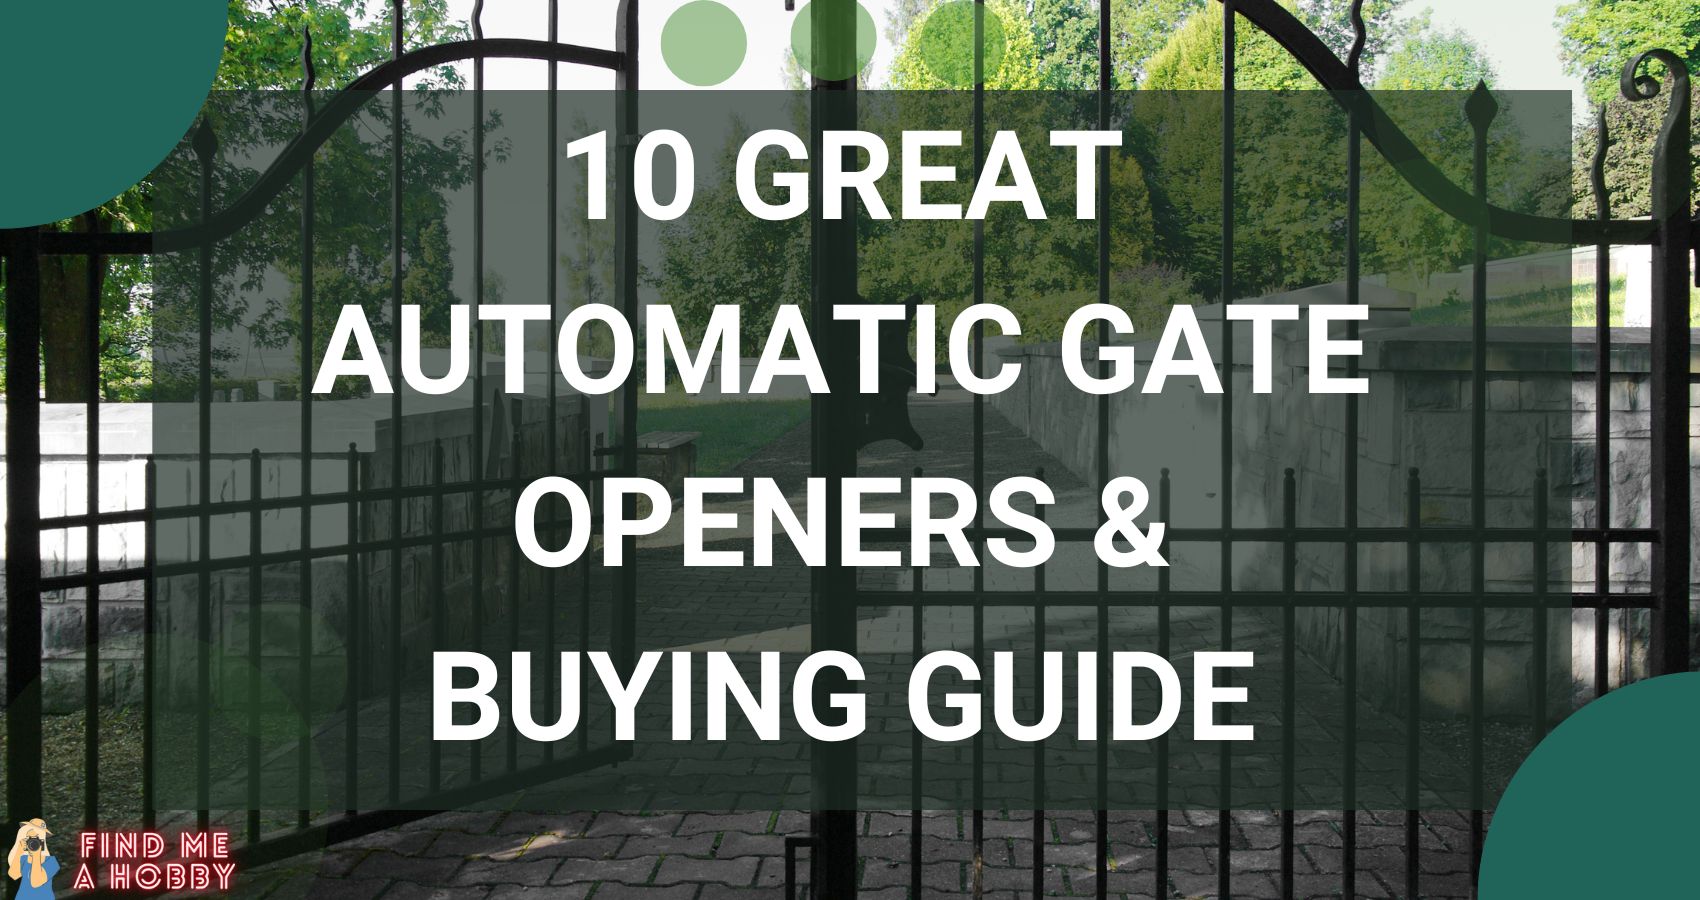 10 Great Automatic Gate Openers & Buying Guide